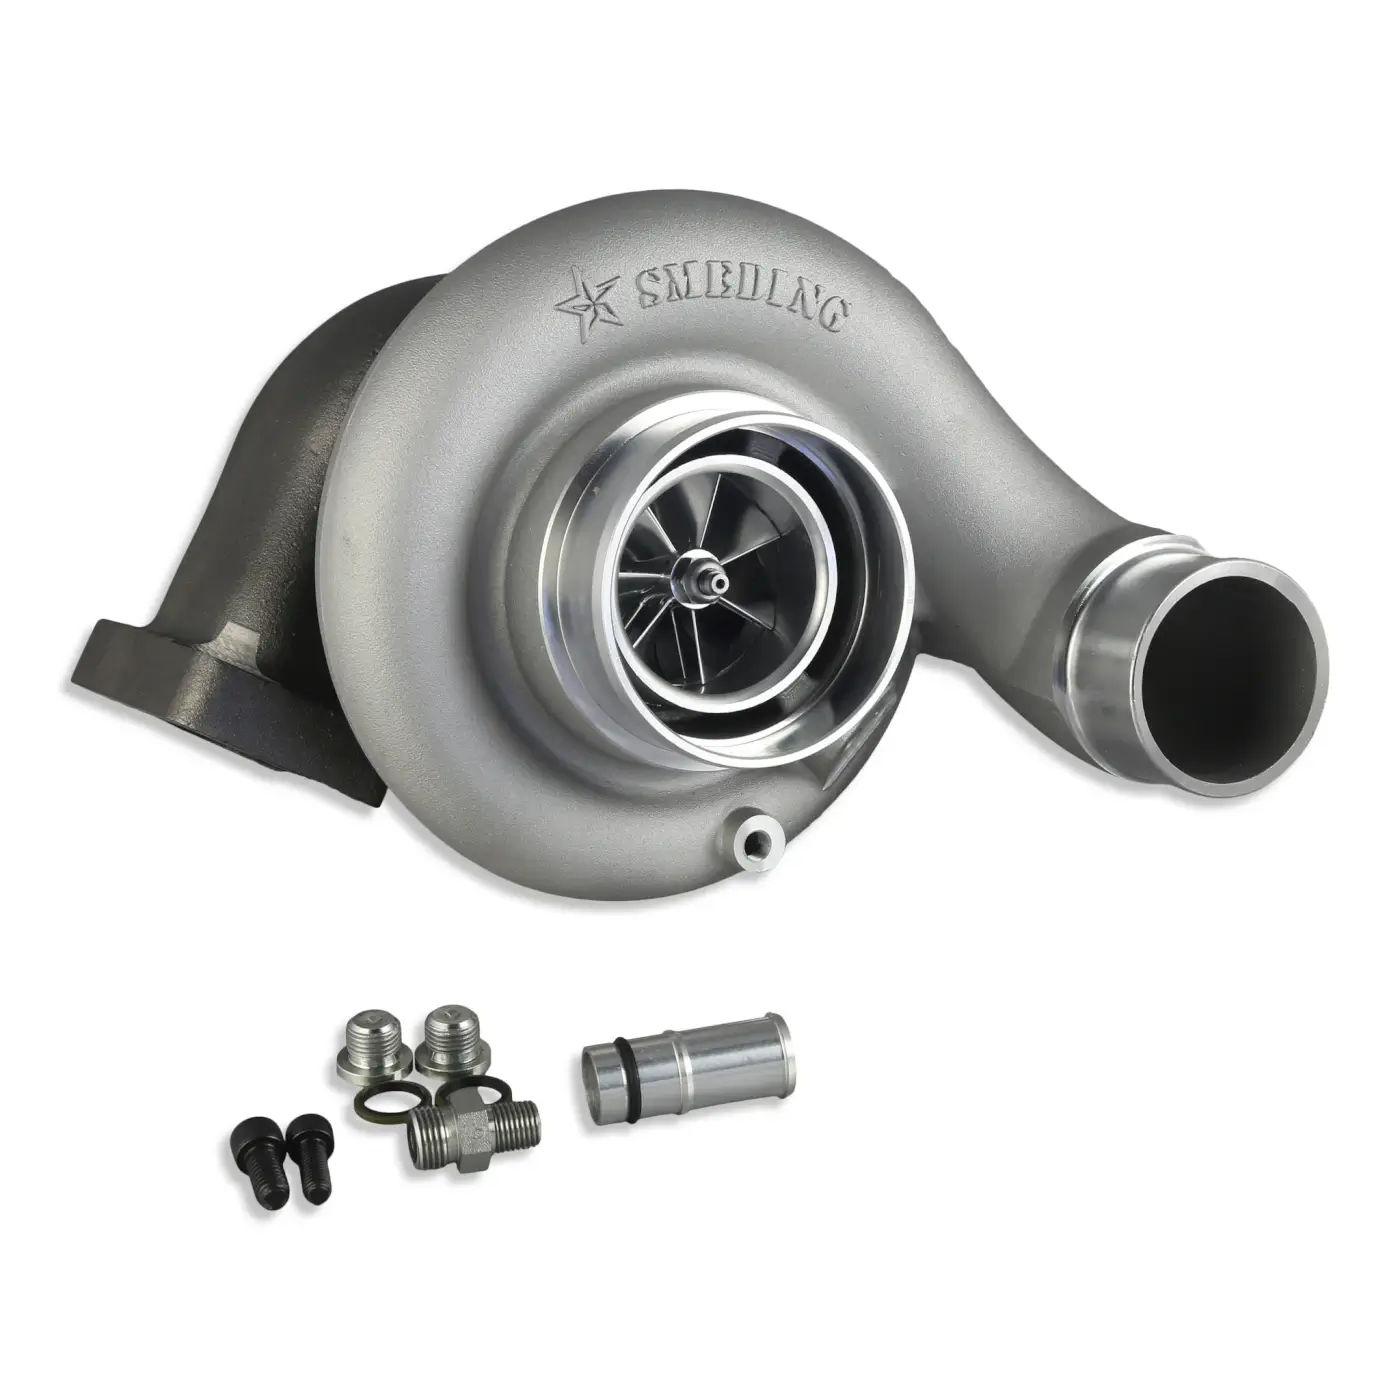 S300 Replacement Turbo